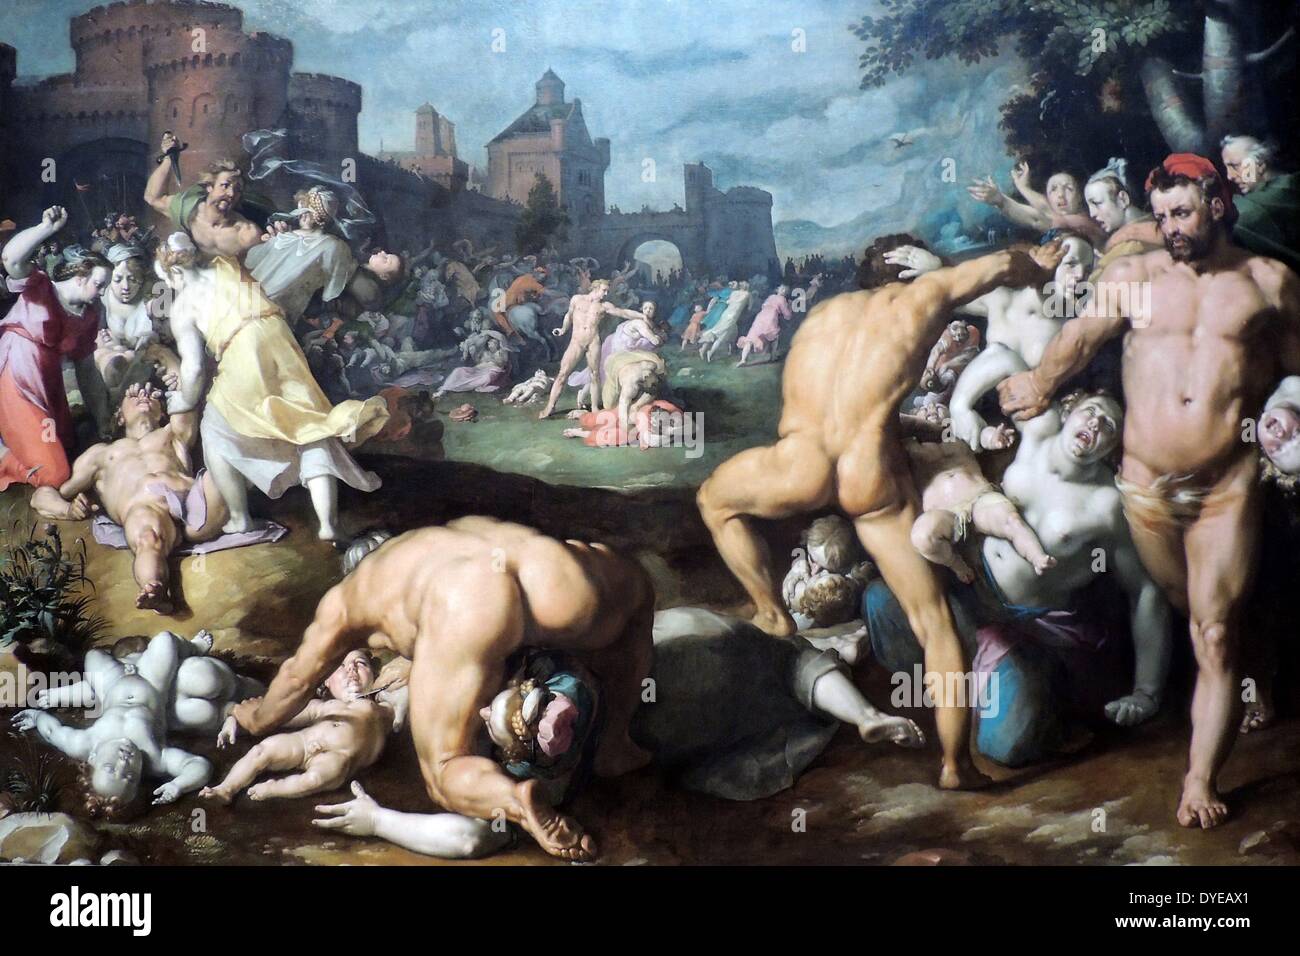 The Massacre of the Innocents by Cornelis Cornelisz van Haarlem (1562-1638) oil on canvas, 1590. When Herod, the King of Judea, learned that a child destines to become 'King of the Jews' would be born in Bethlehem, he ordered the slaughter of all boys under the age of two. The painter portrayed the massacre as a gruesome nightmare. Horror follows upon horror: at lower left a soldier slits a child's throat, while above them a woman gouges out a soldier's eyes. Stock Photo